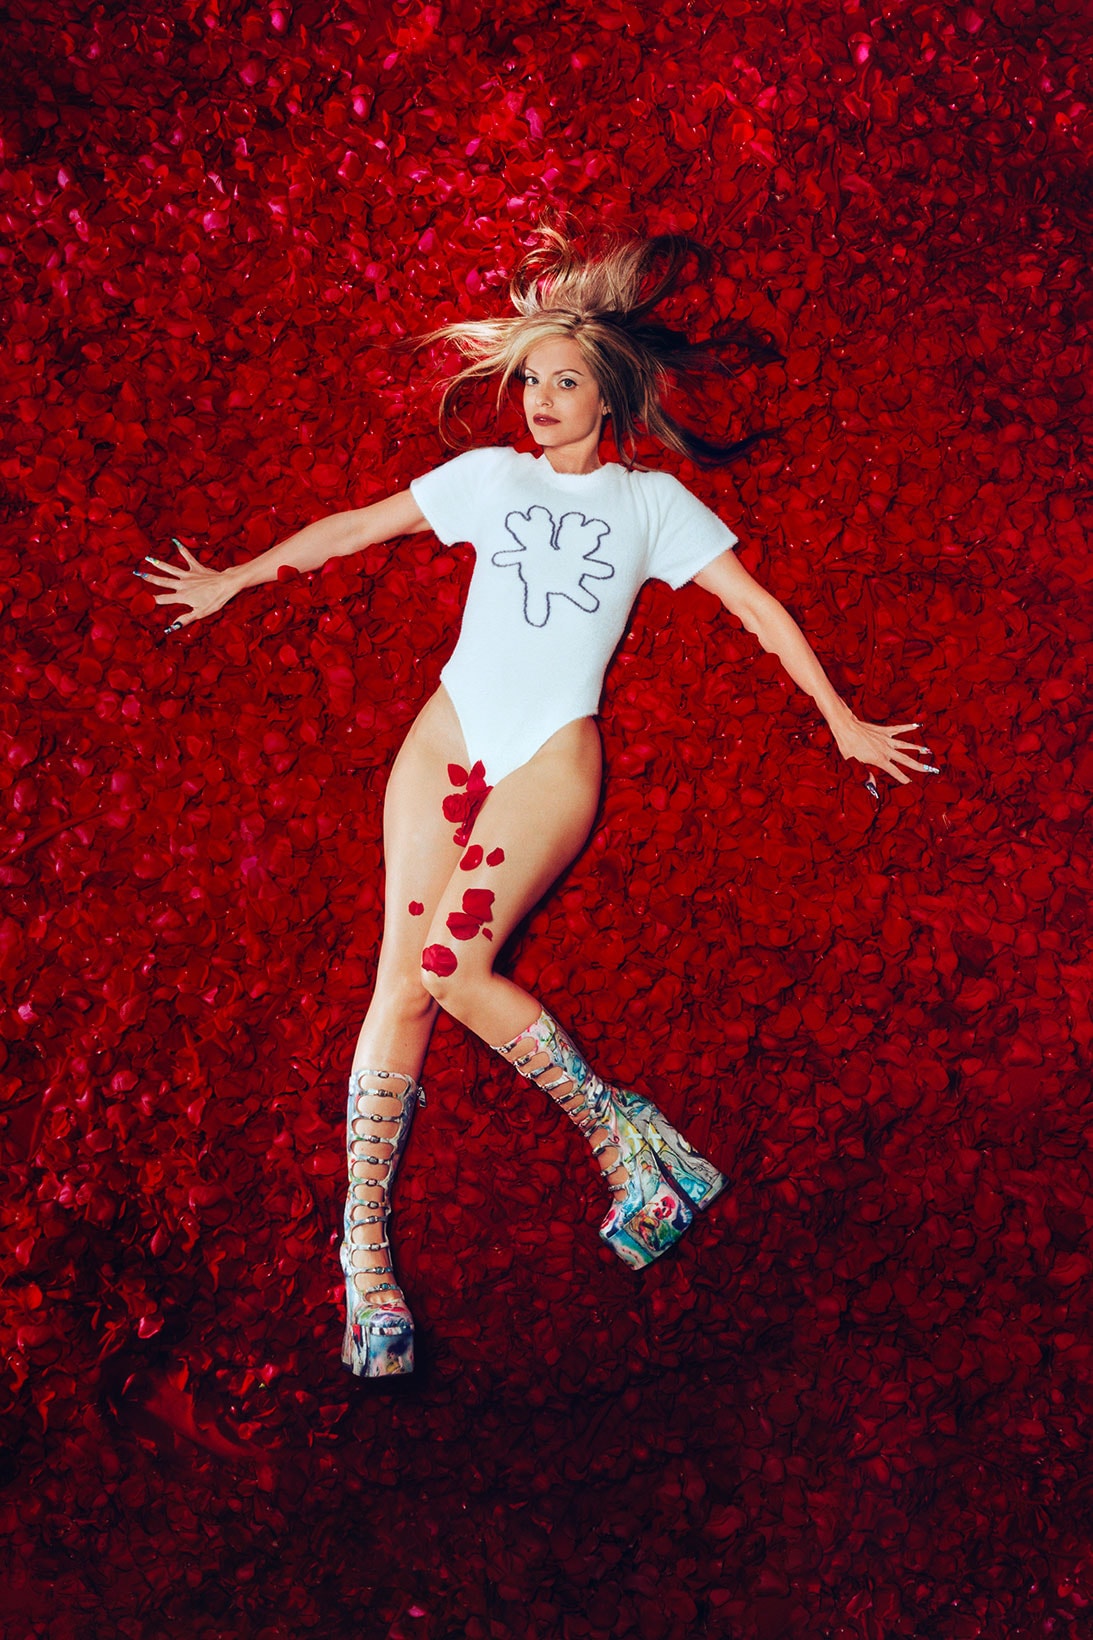 mena suvari Heaven by Marc Jacobs Spring 2022 Campaign american beauty 1999